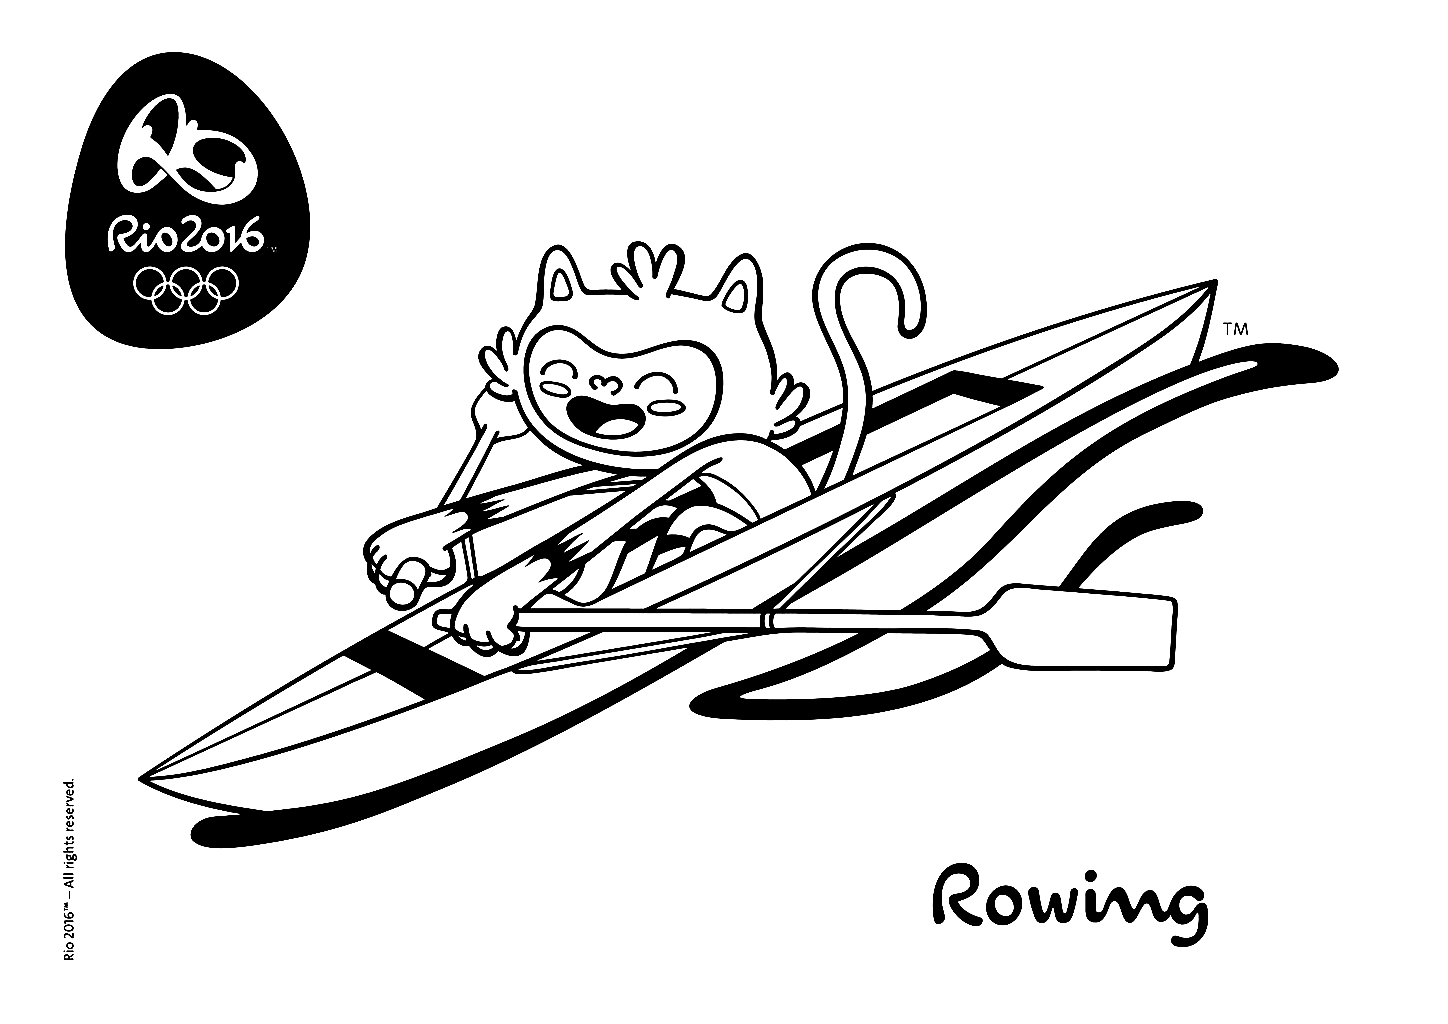 Rowing Rio 2016 from Rowing